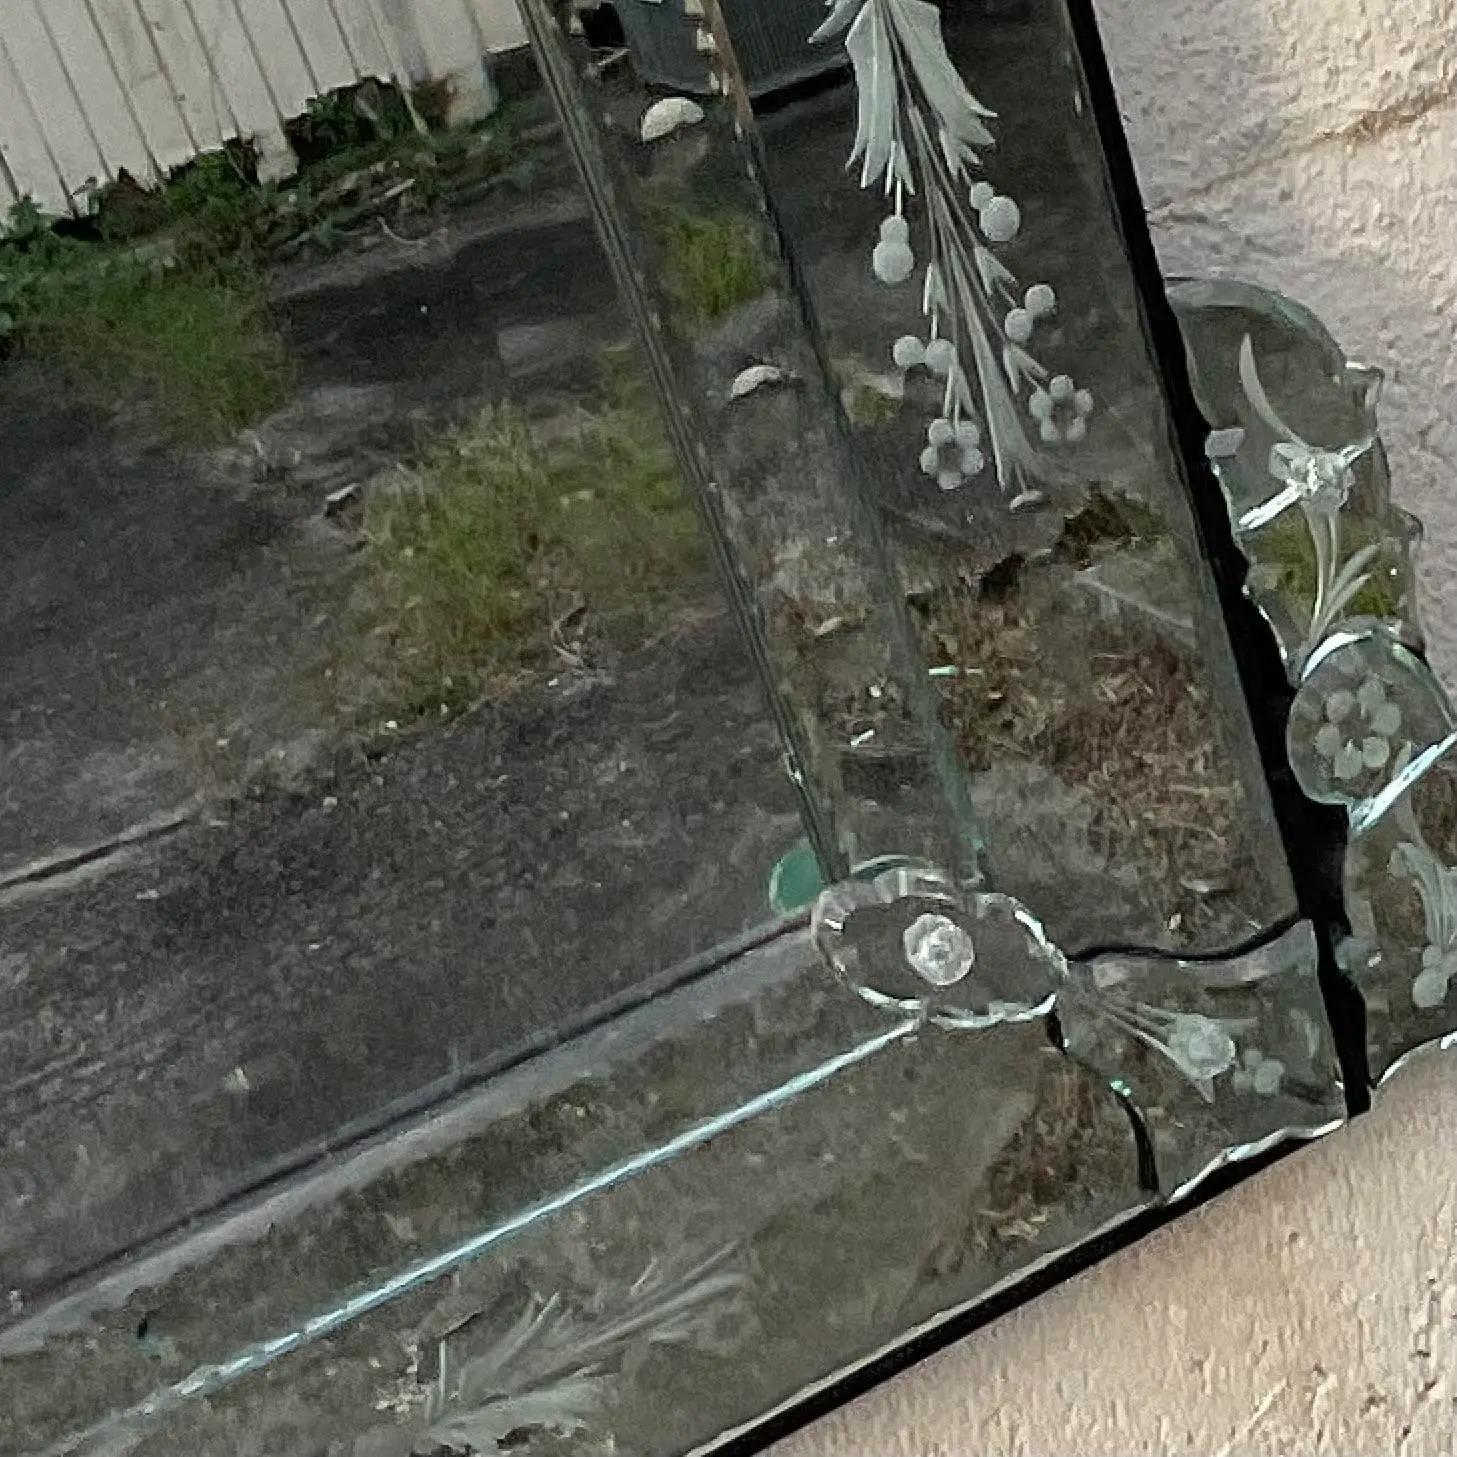 A fabulous vintage Regency etched wall mirror. A beautiful Venetian cut glass in a tall classic shape. Beautiful silvering to the mirror from time. Acquired from a Palm a each estate.

The mirror is in great vintage condition. Minor scuffs and